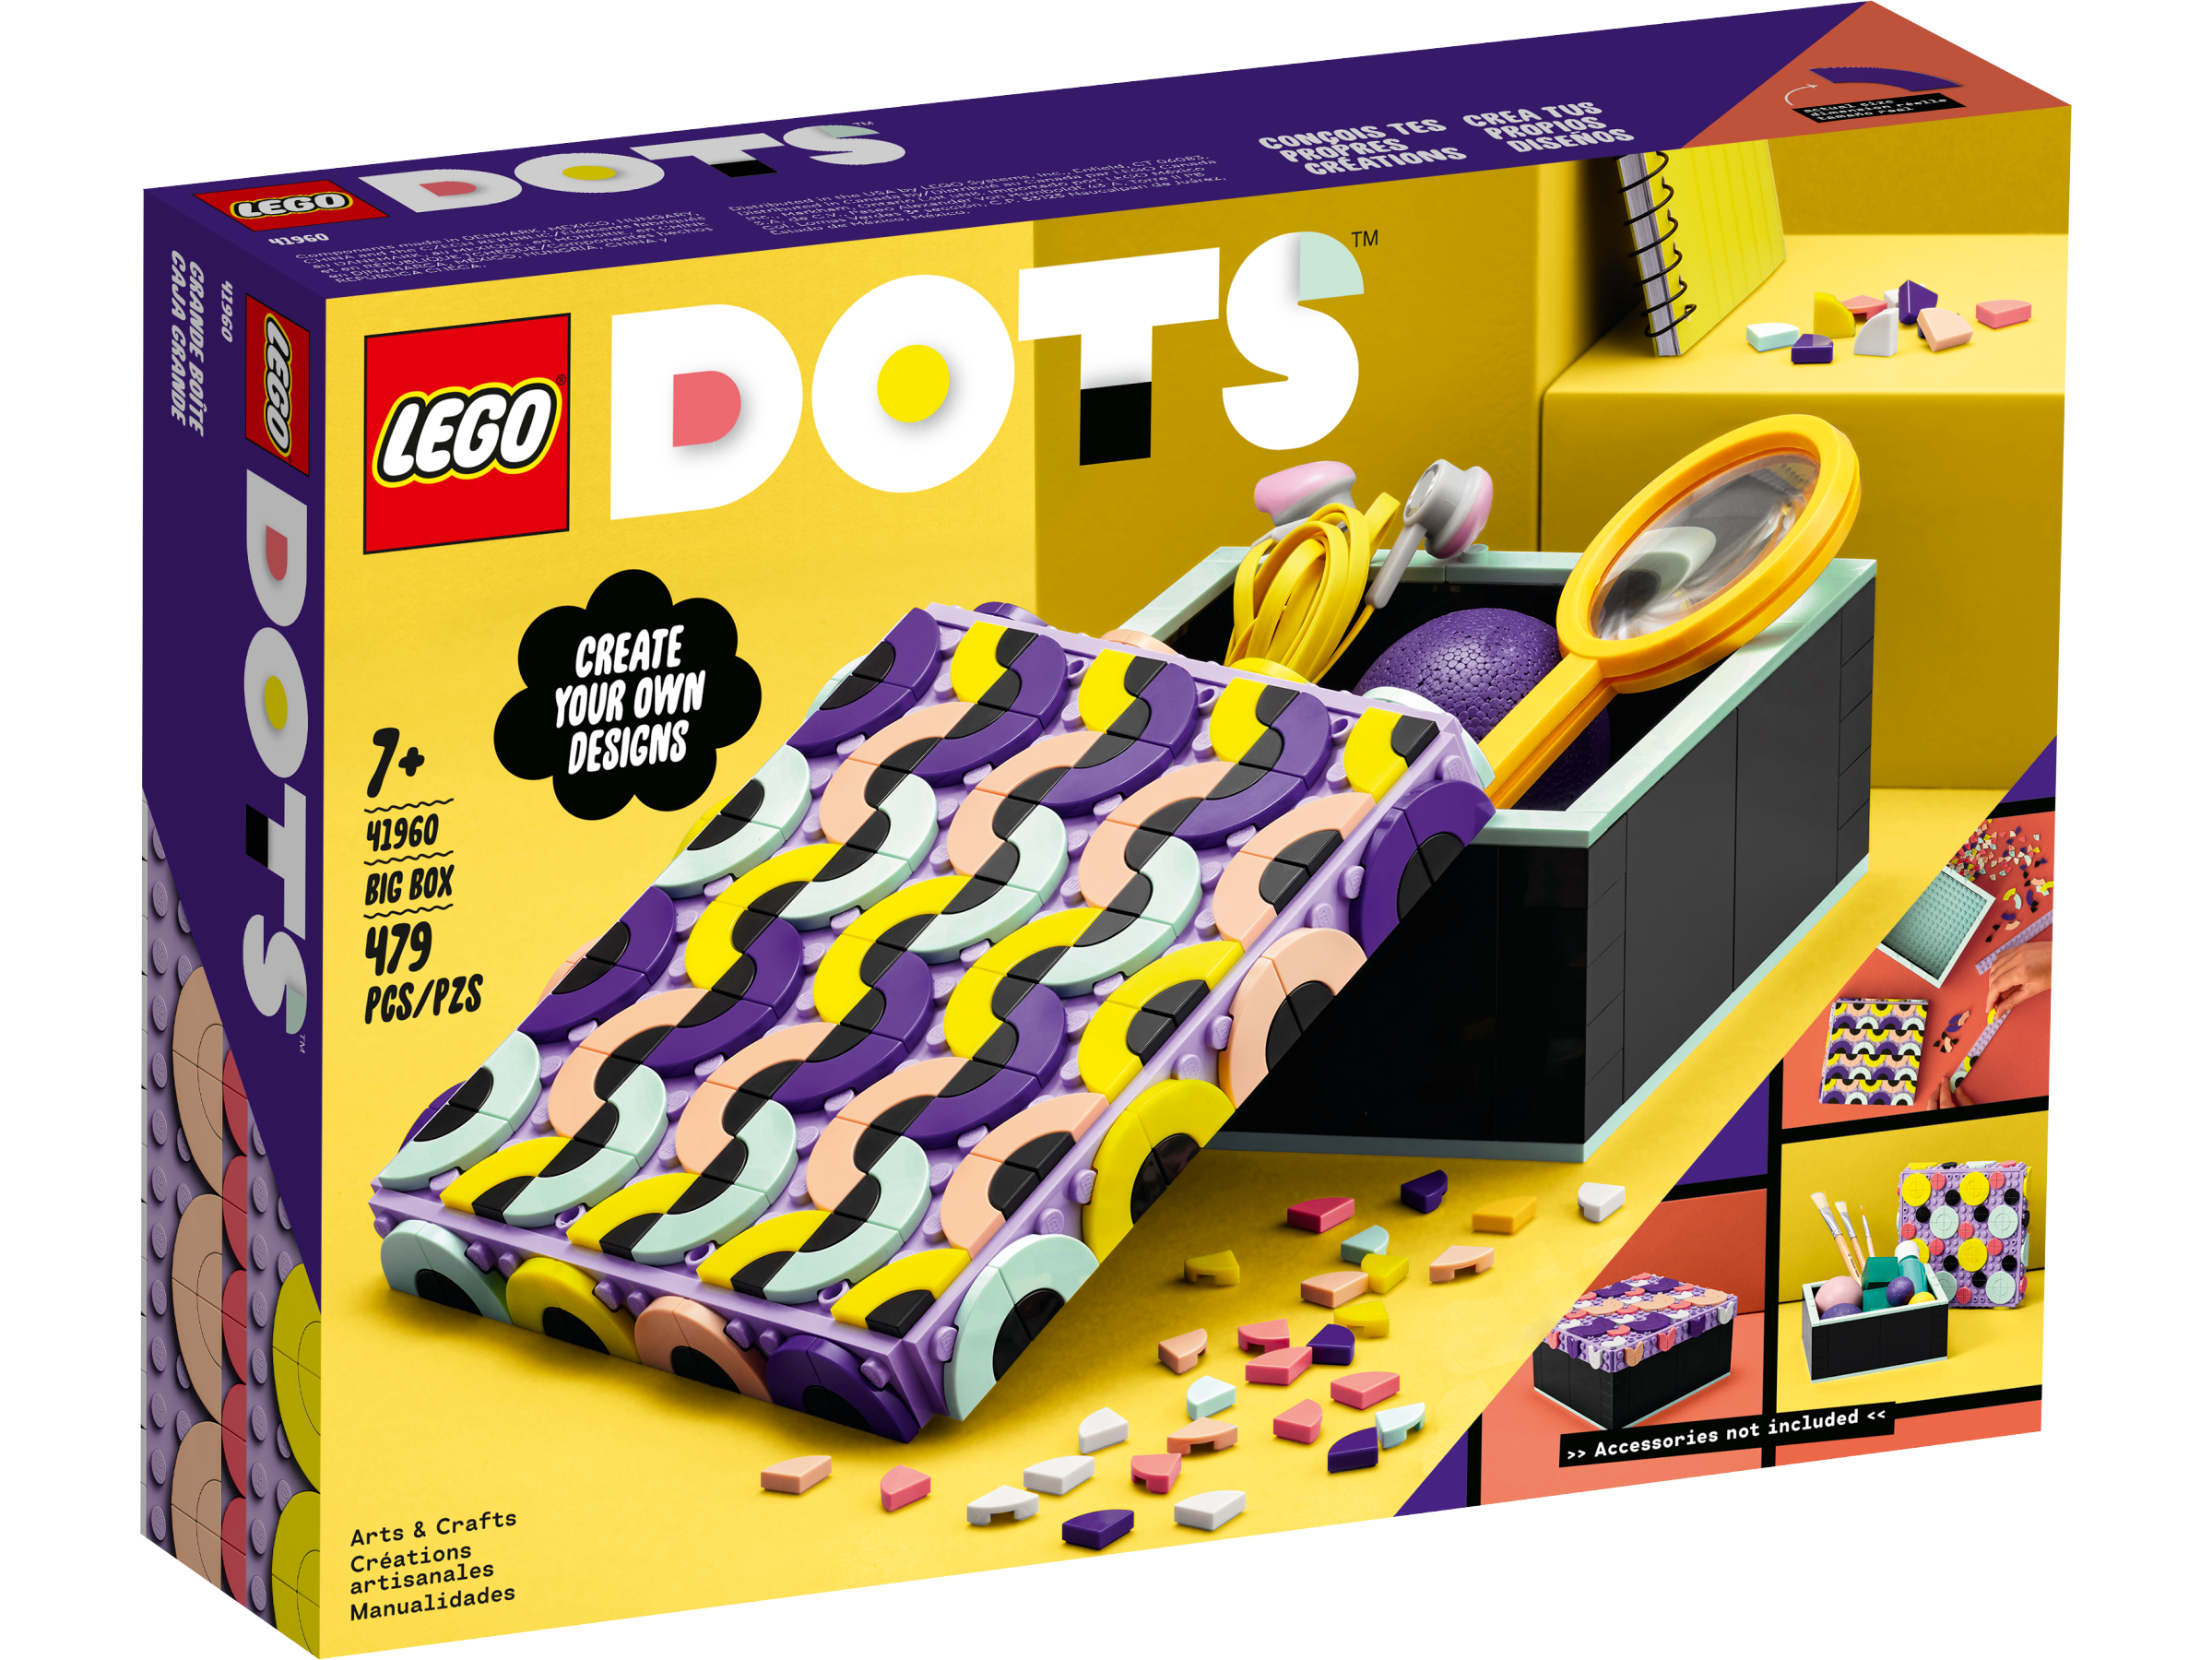 What Is Lego's New Product Lego Dots?